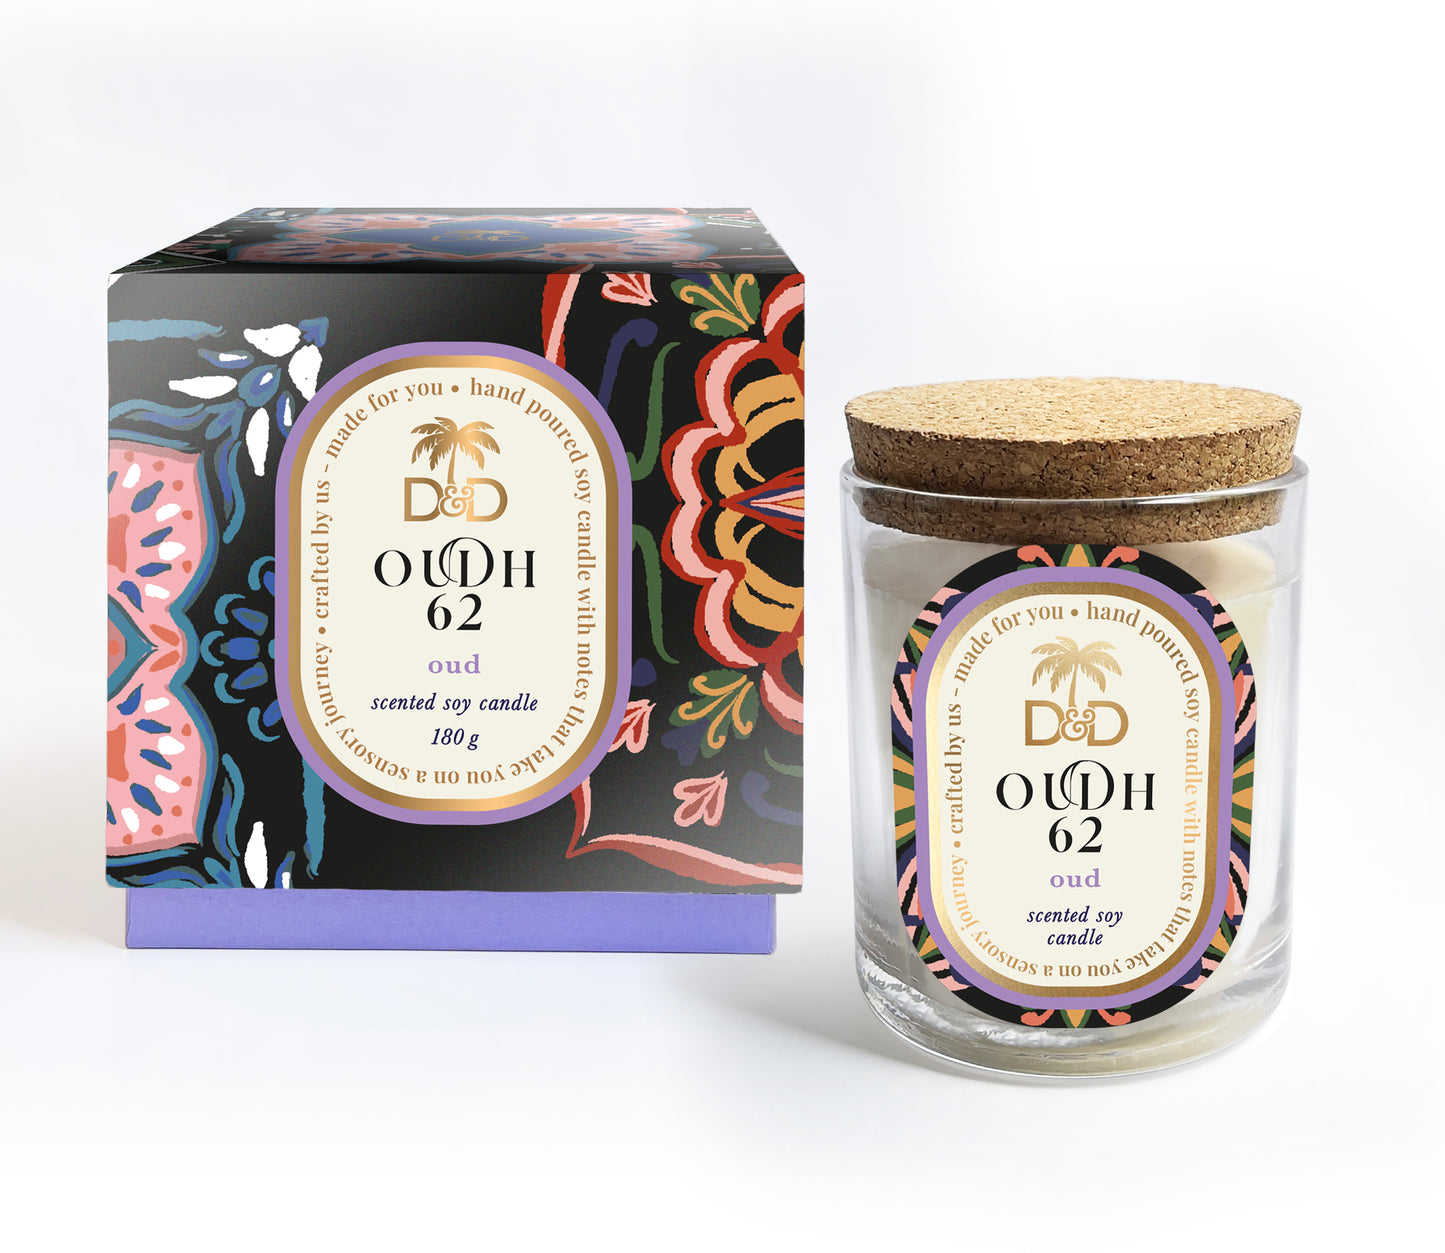 oud scented soy candle